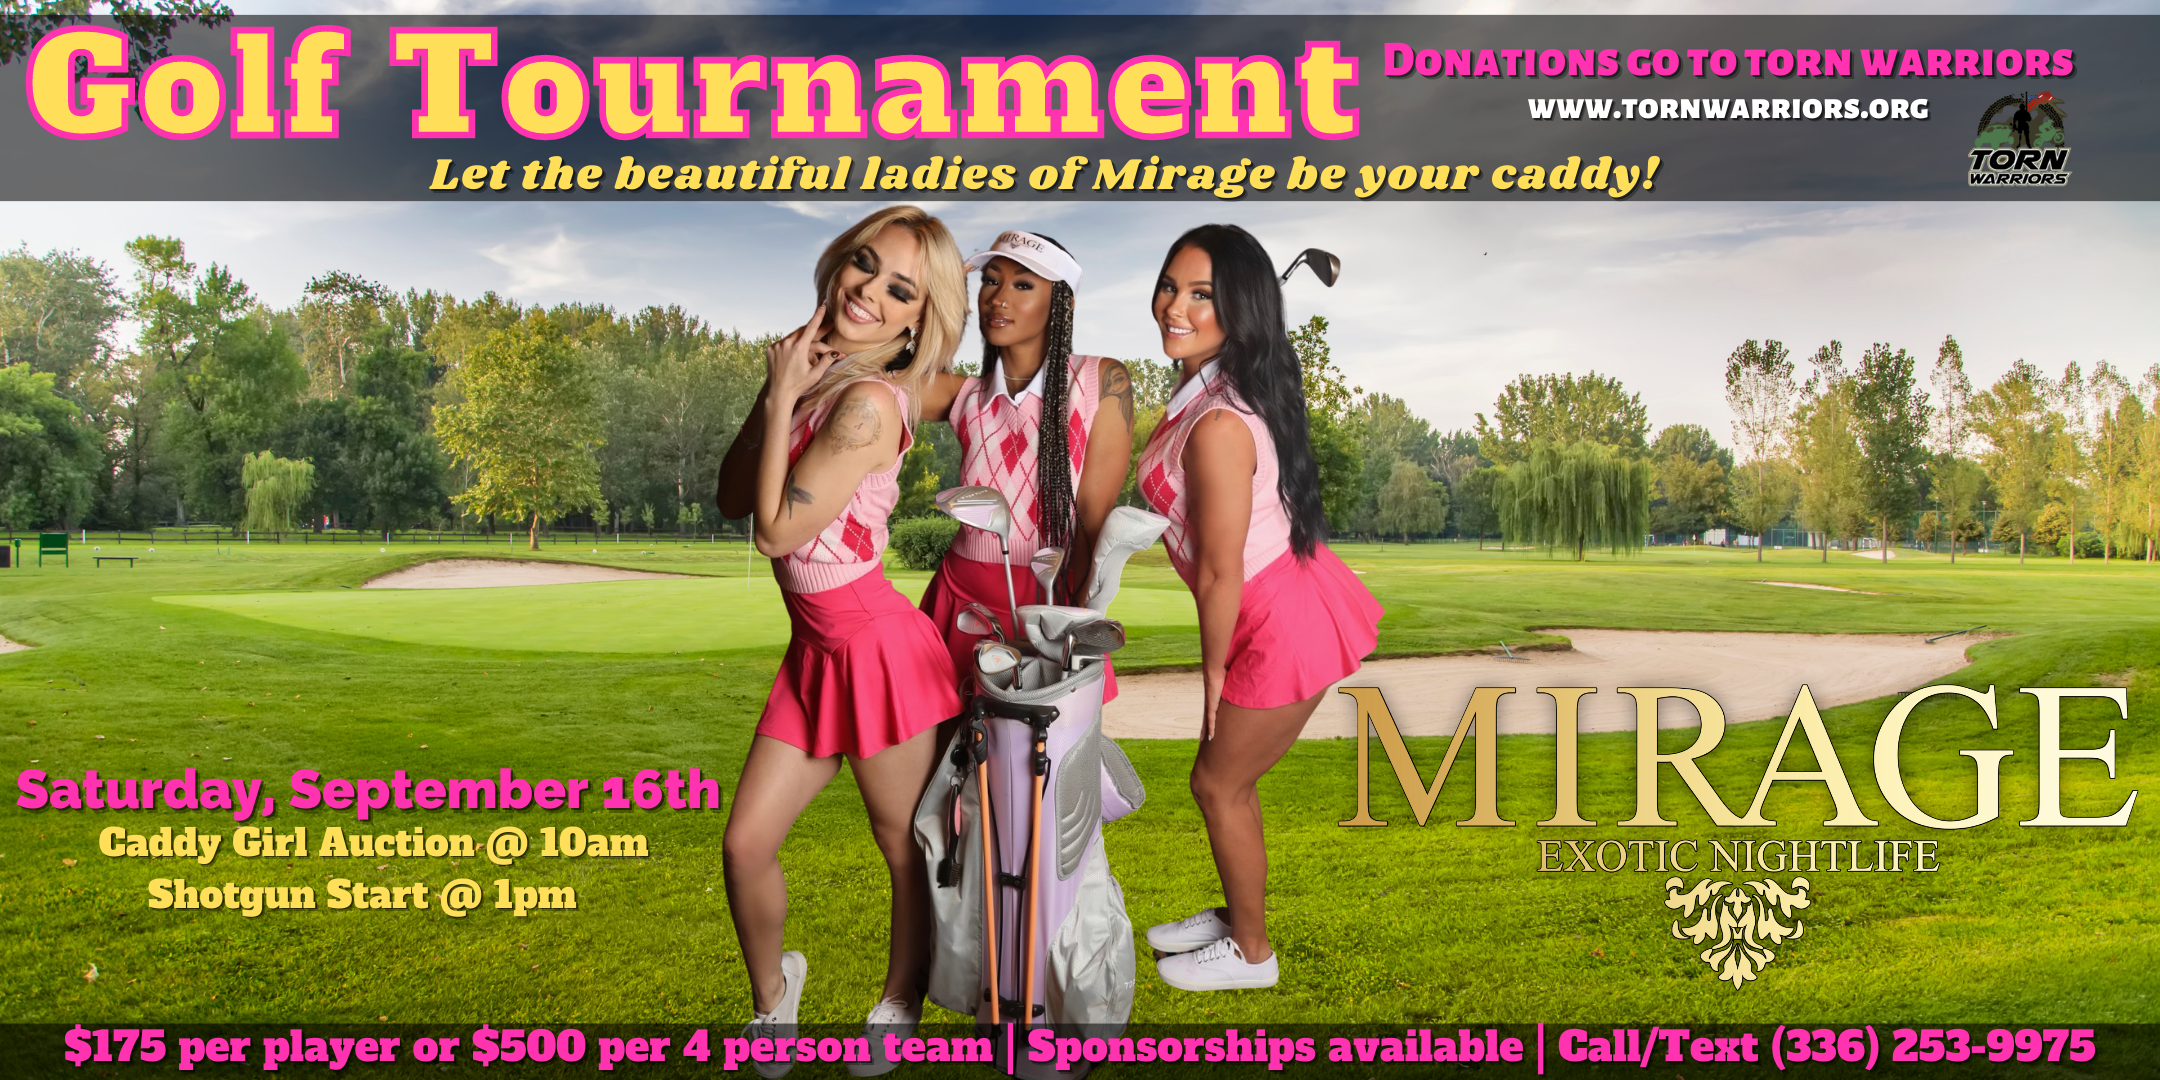 Mirage Exotic Nightlife's Annual Golf Tournament- Our Girls, Your Caddies!!